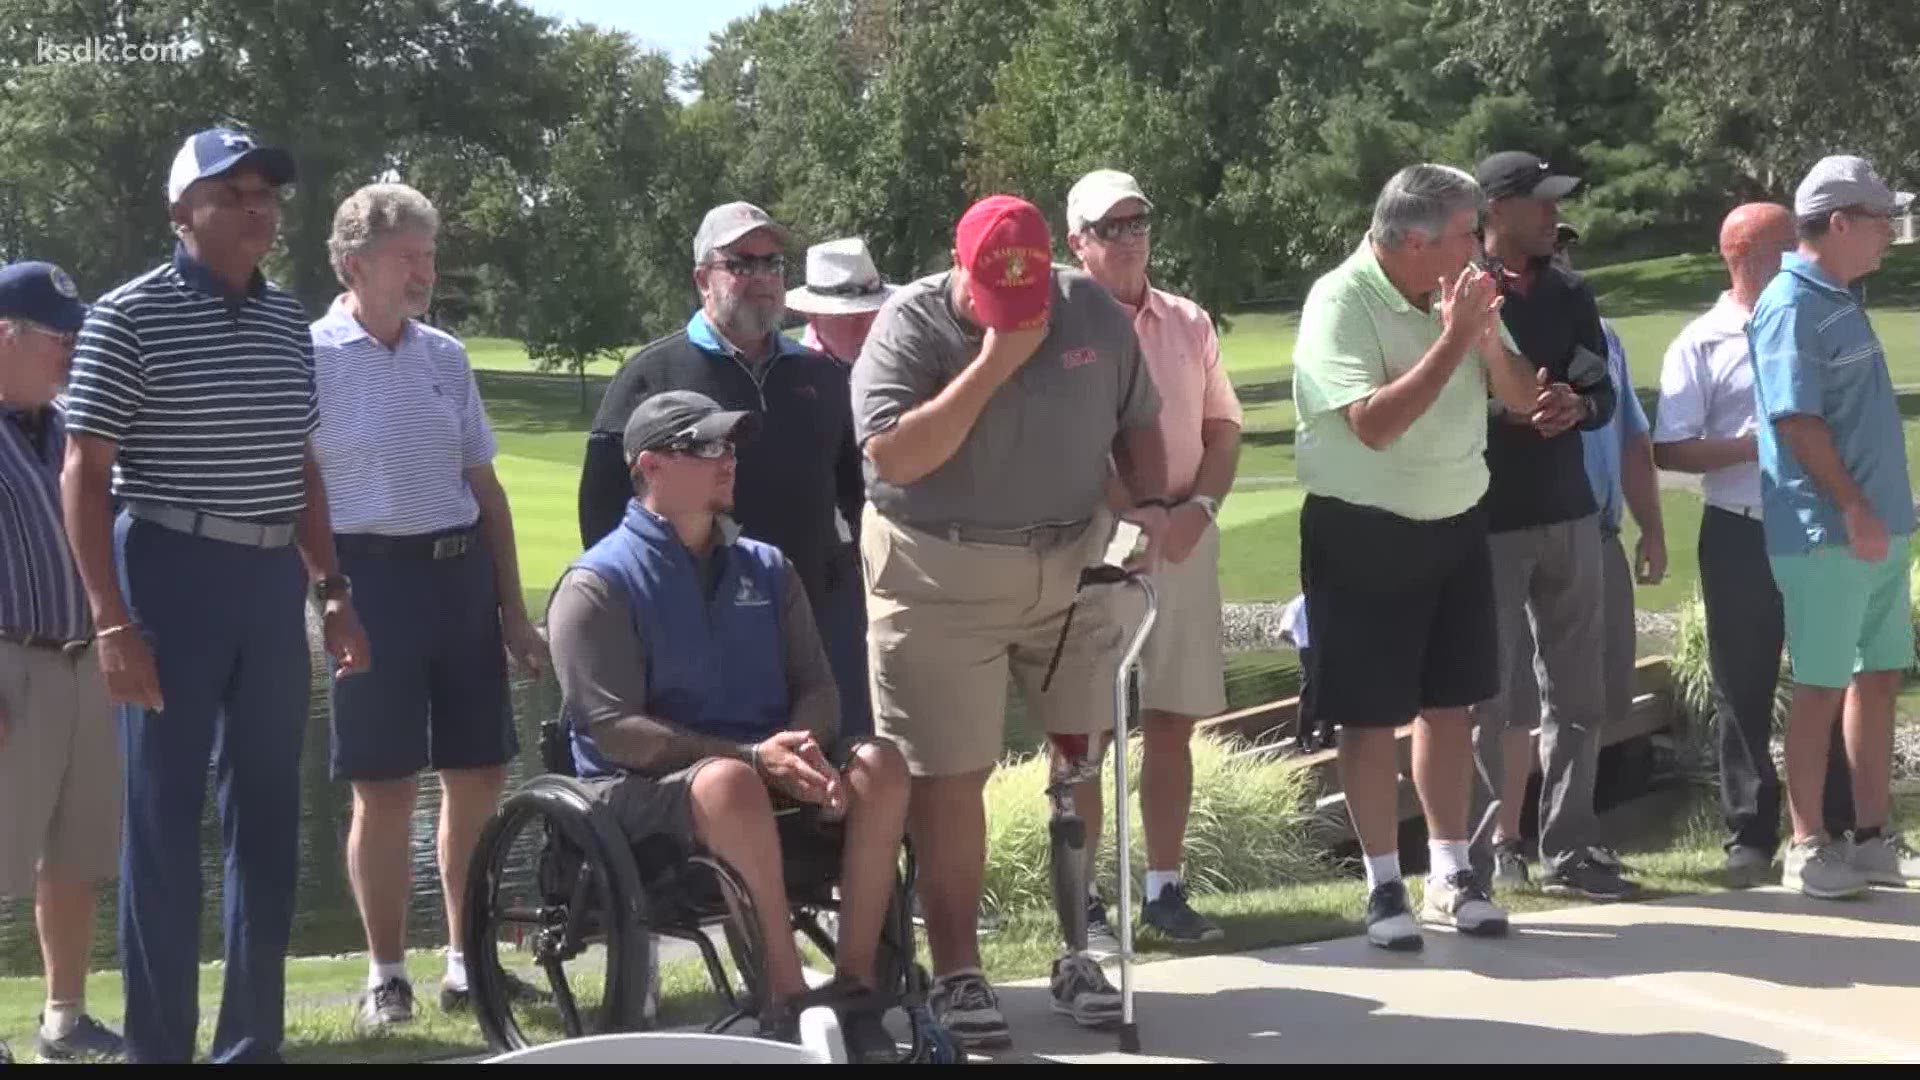 The tournament benefits United States veterans in the St. Louis area